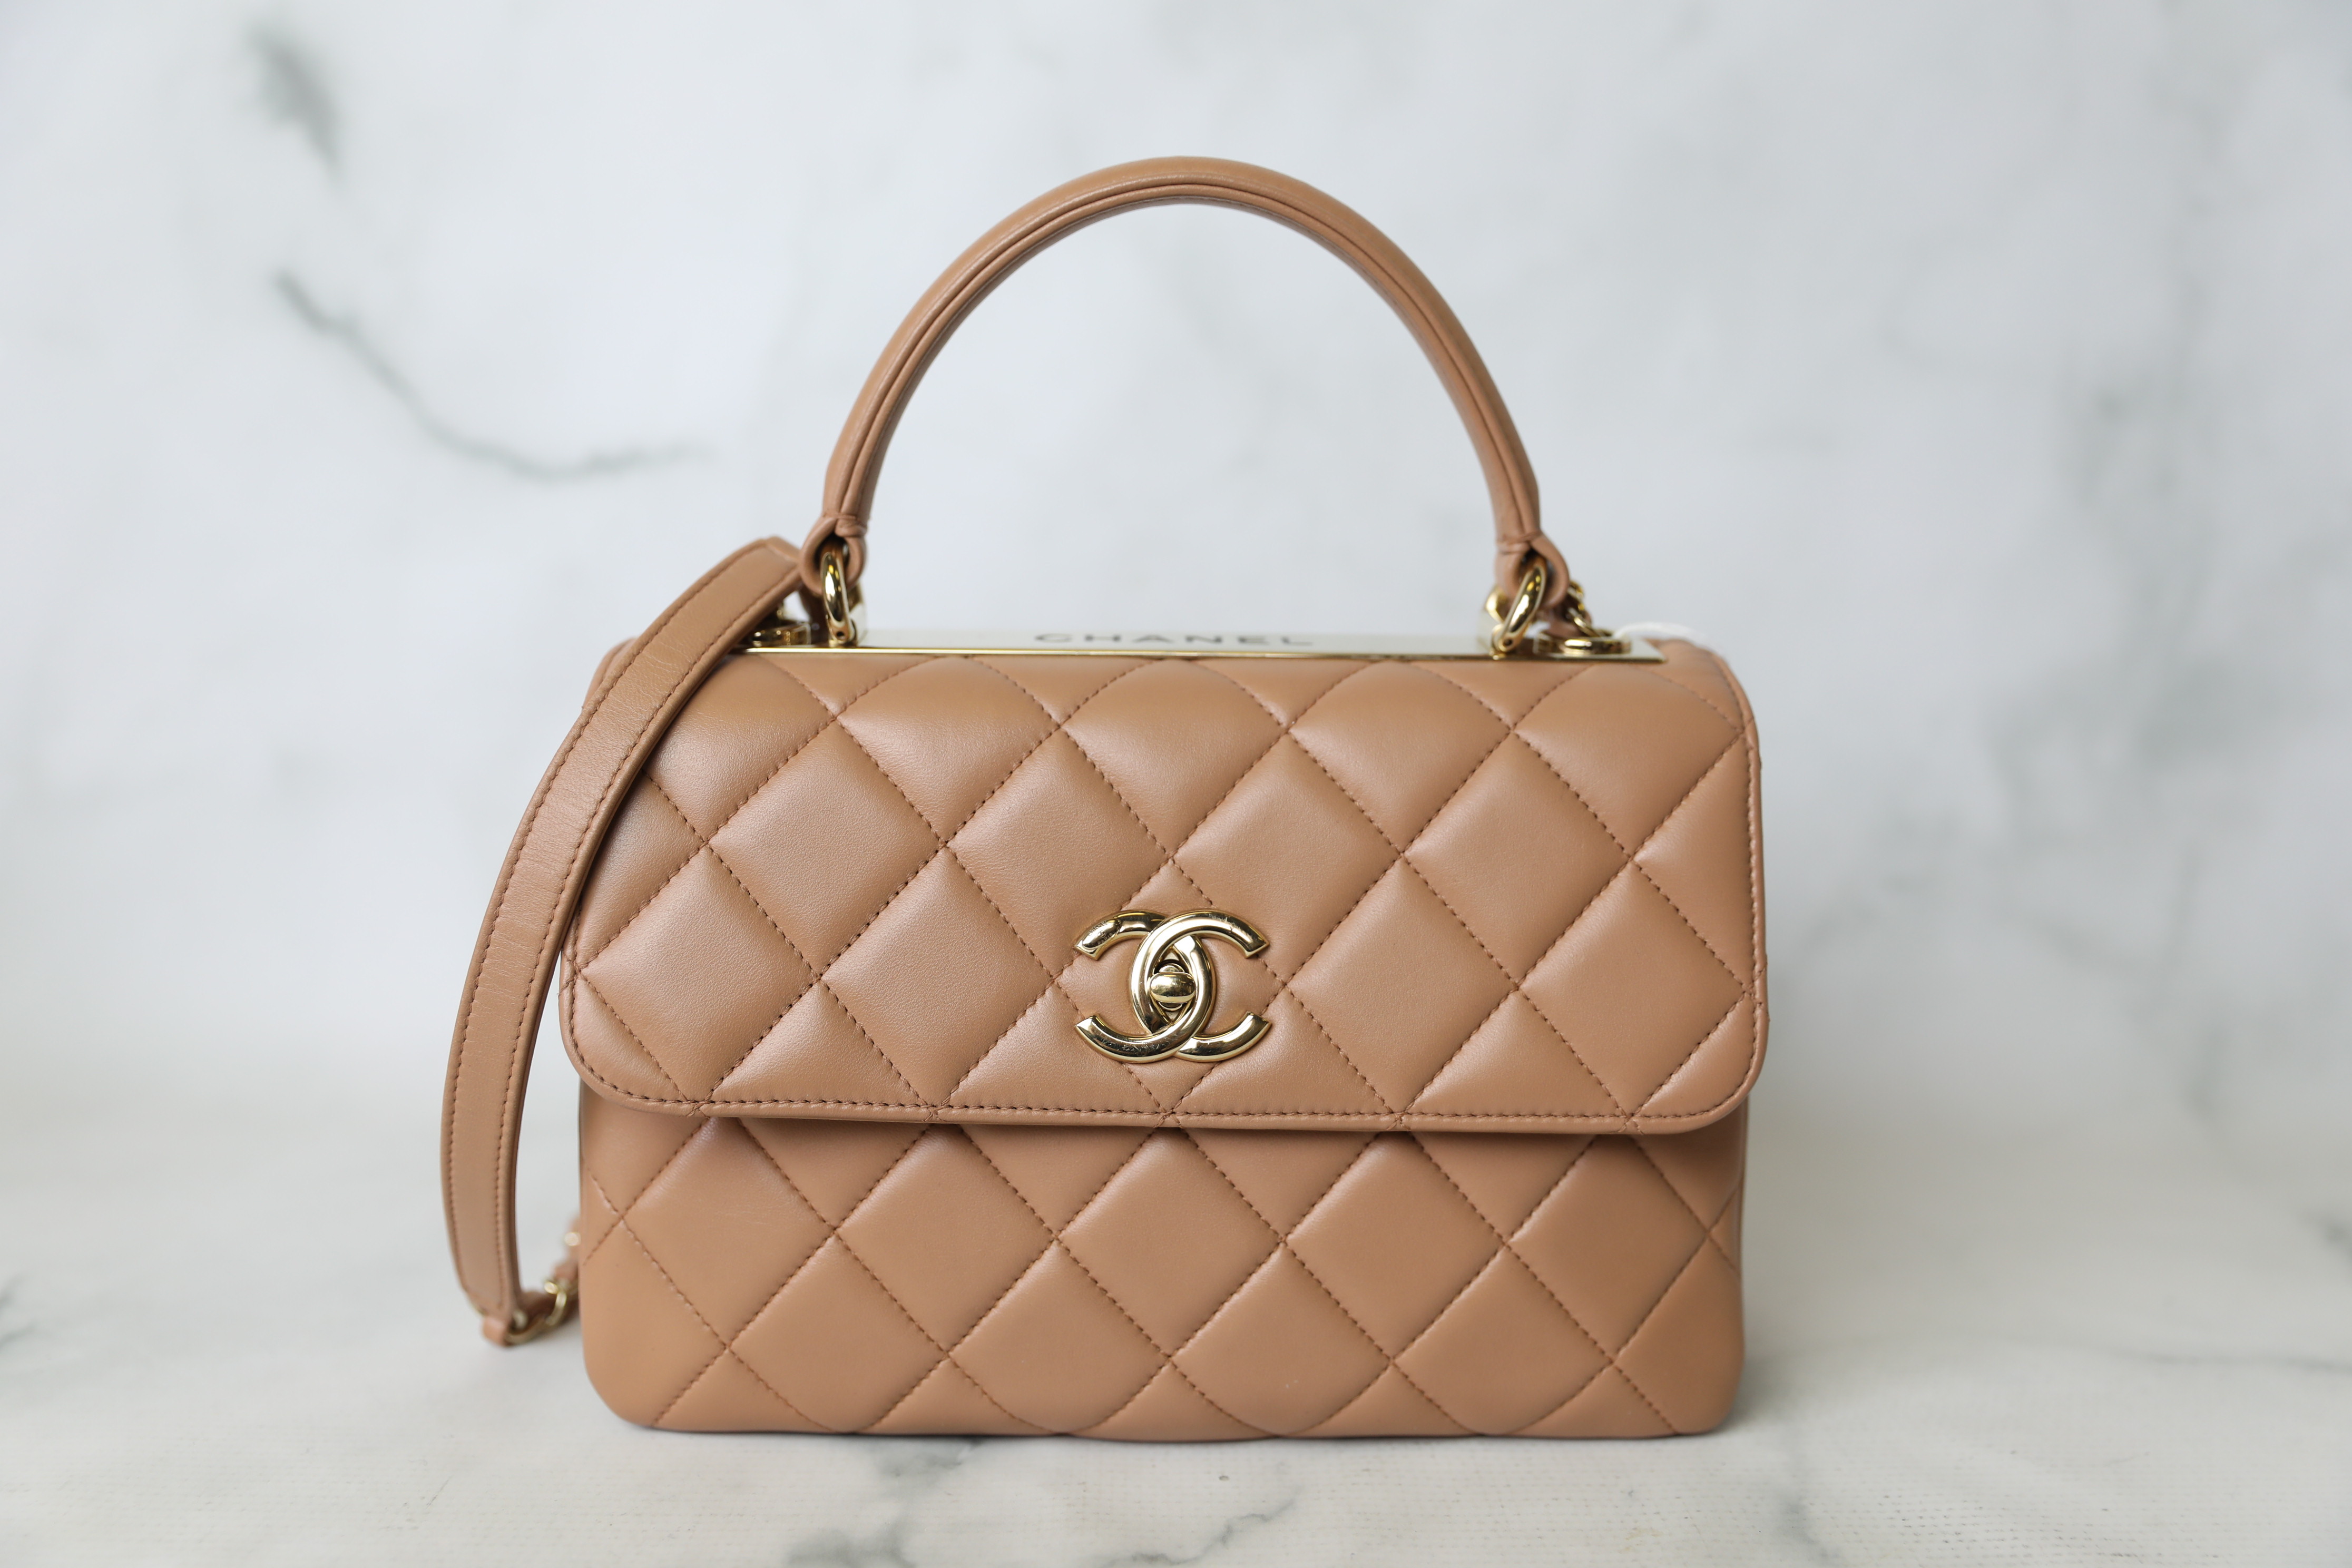 Chanel Trendy Small, Caramel Brown Lambskin with Gold Hardware, Preowned in  Dustbag WA001 - Julia Rose Boston